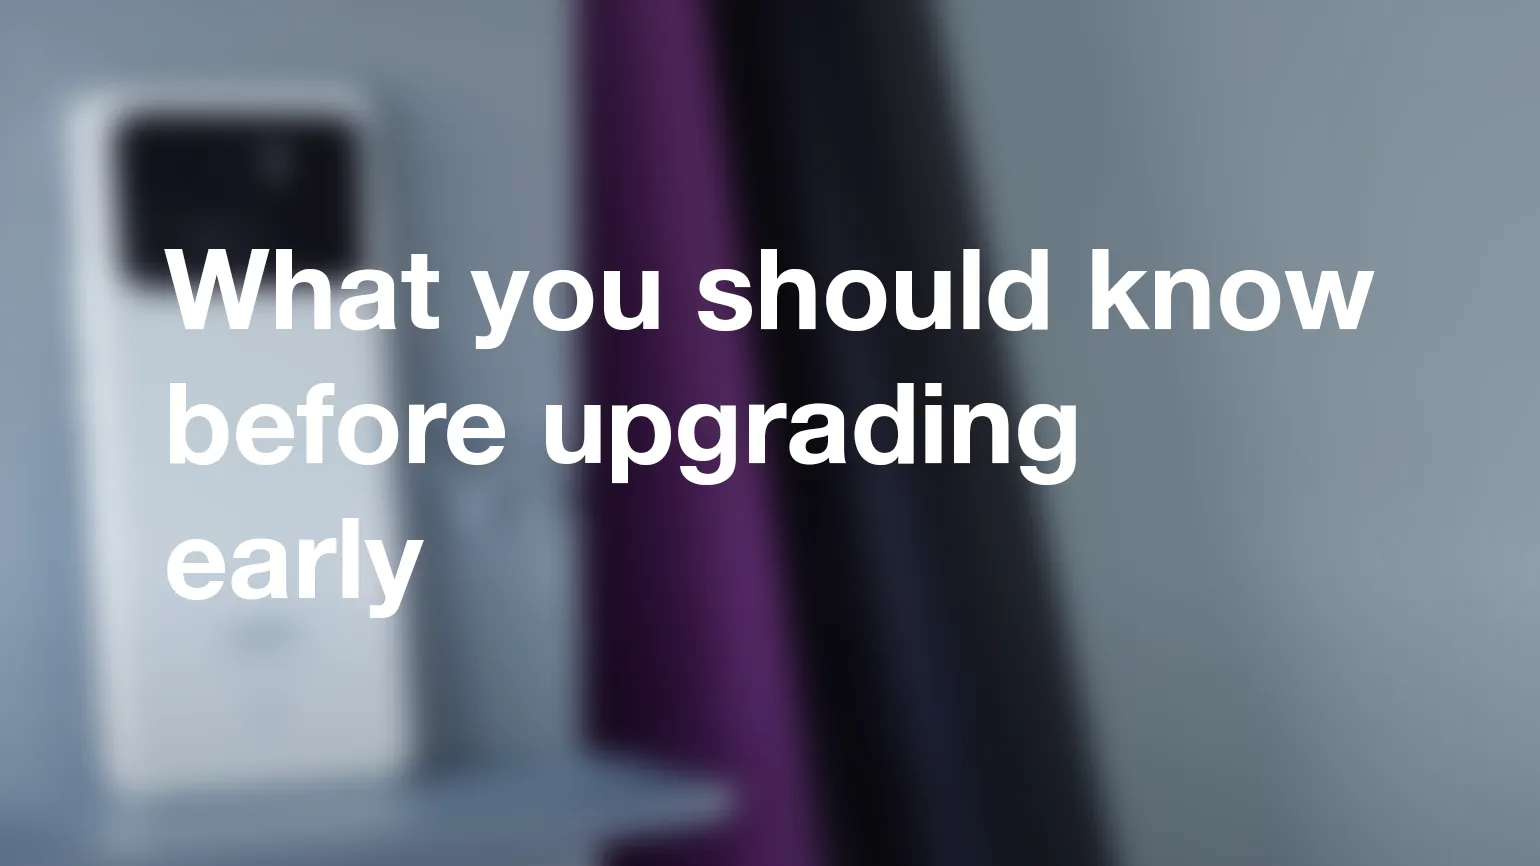 What you should know before upgrading early